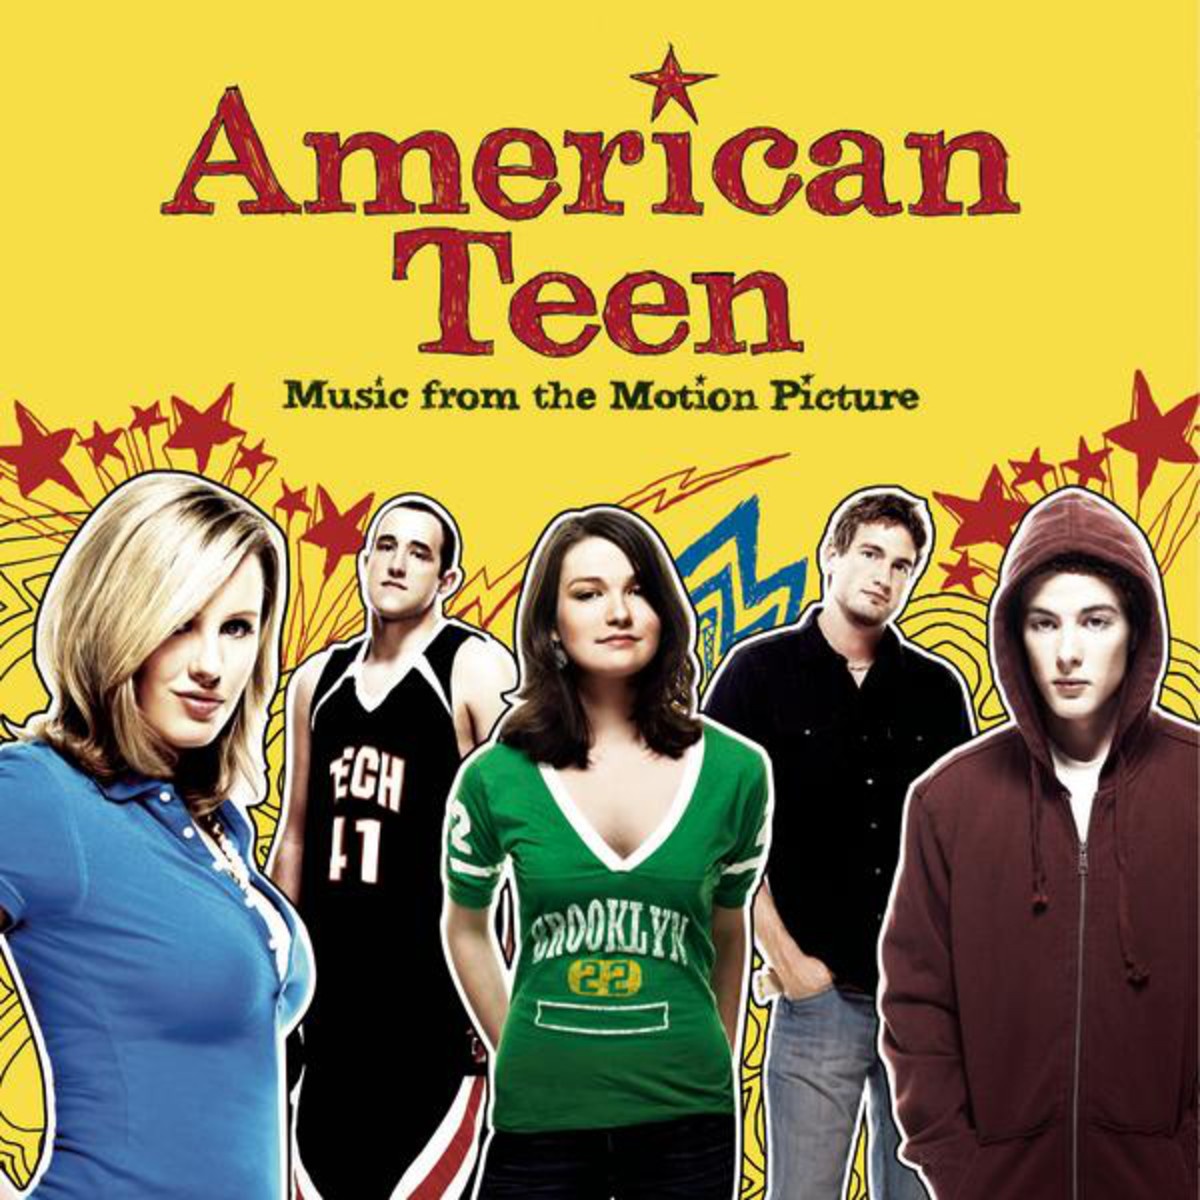 American Teen (Music from the Motion Picture)